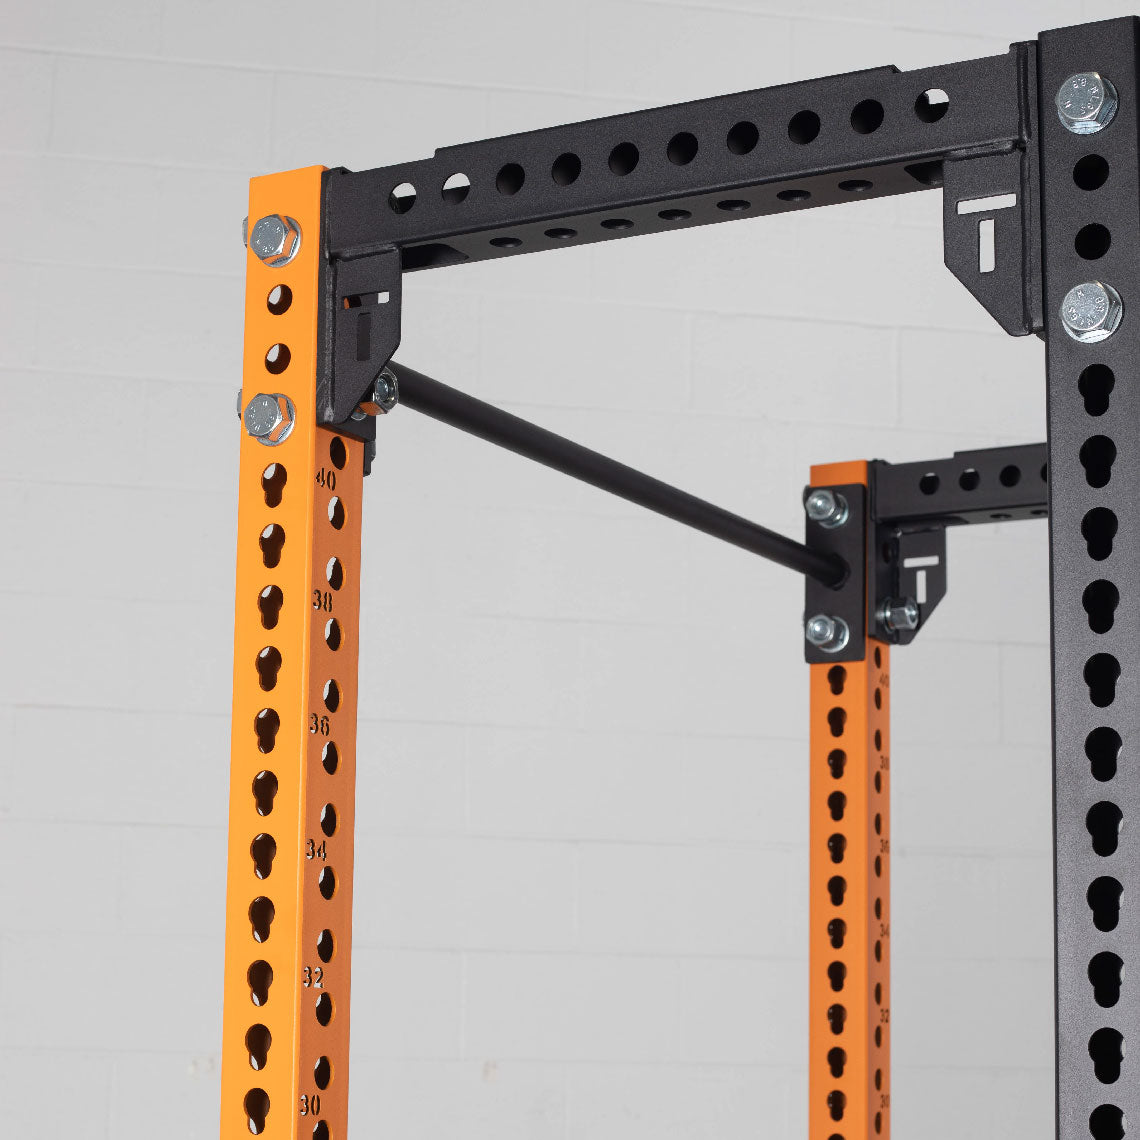 TITAN Series 24" Extension Kit - Extension Color: Orange - Extension Height: 100" - Crossmember: 1.25" Pull-Up Bar | Orange / 100" / 1.25" Pull-Up Bar